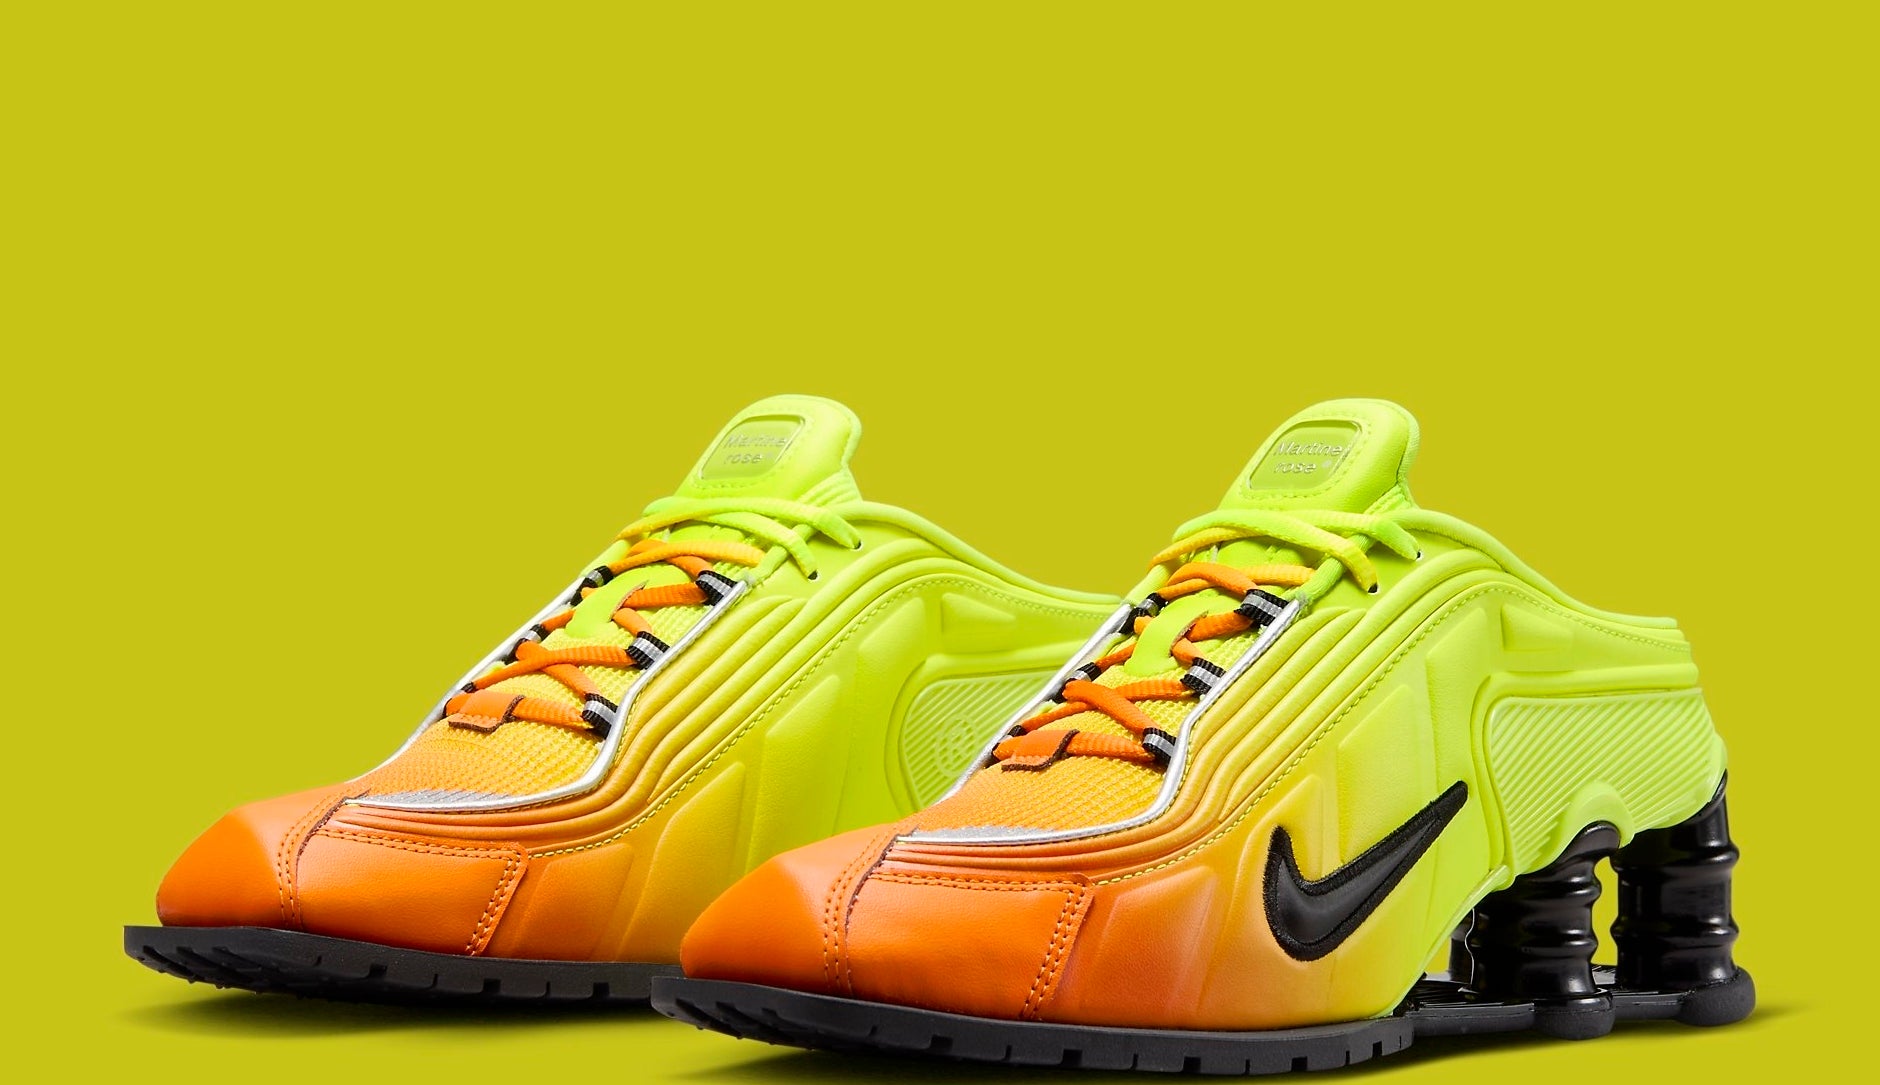 Martine Rose's New Nike Shox Collaboration Pays Homage to Women in Football